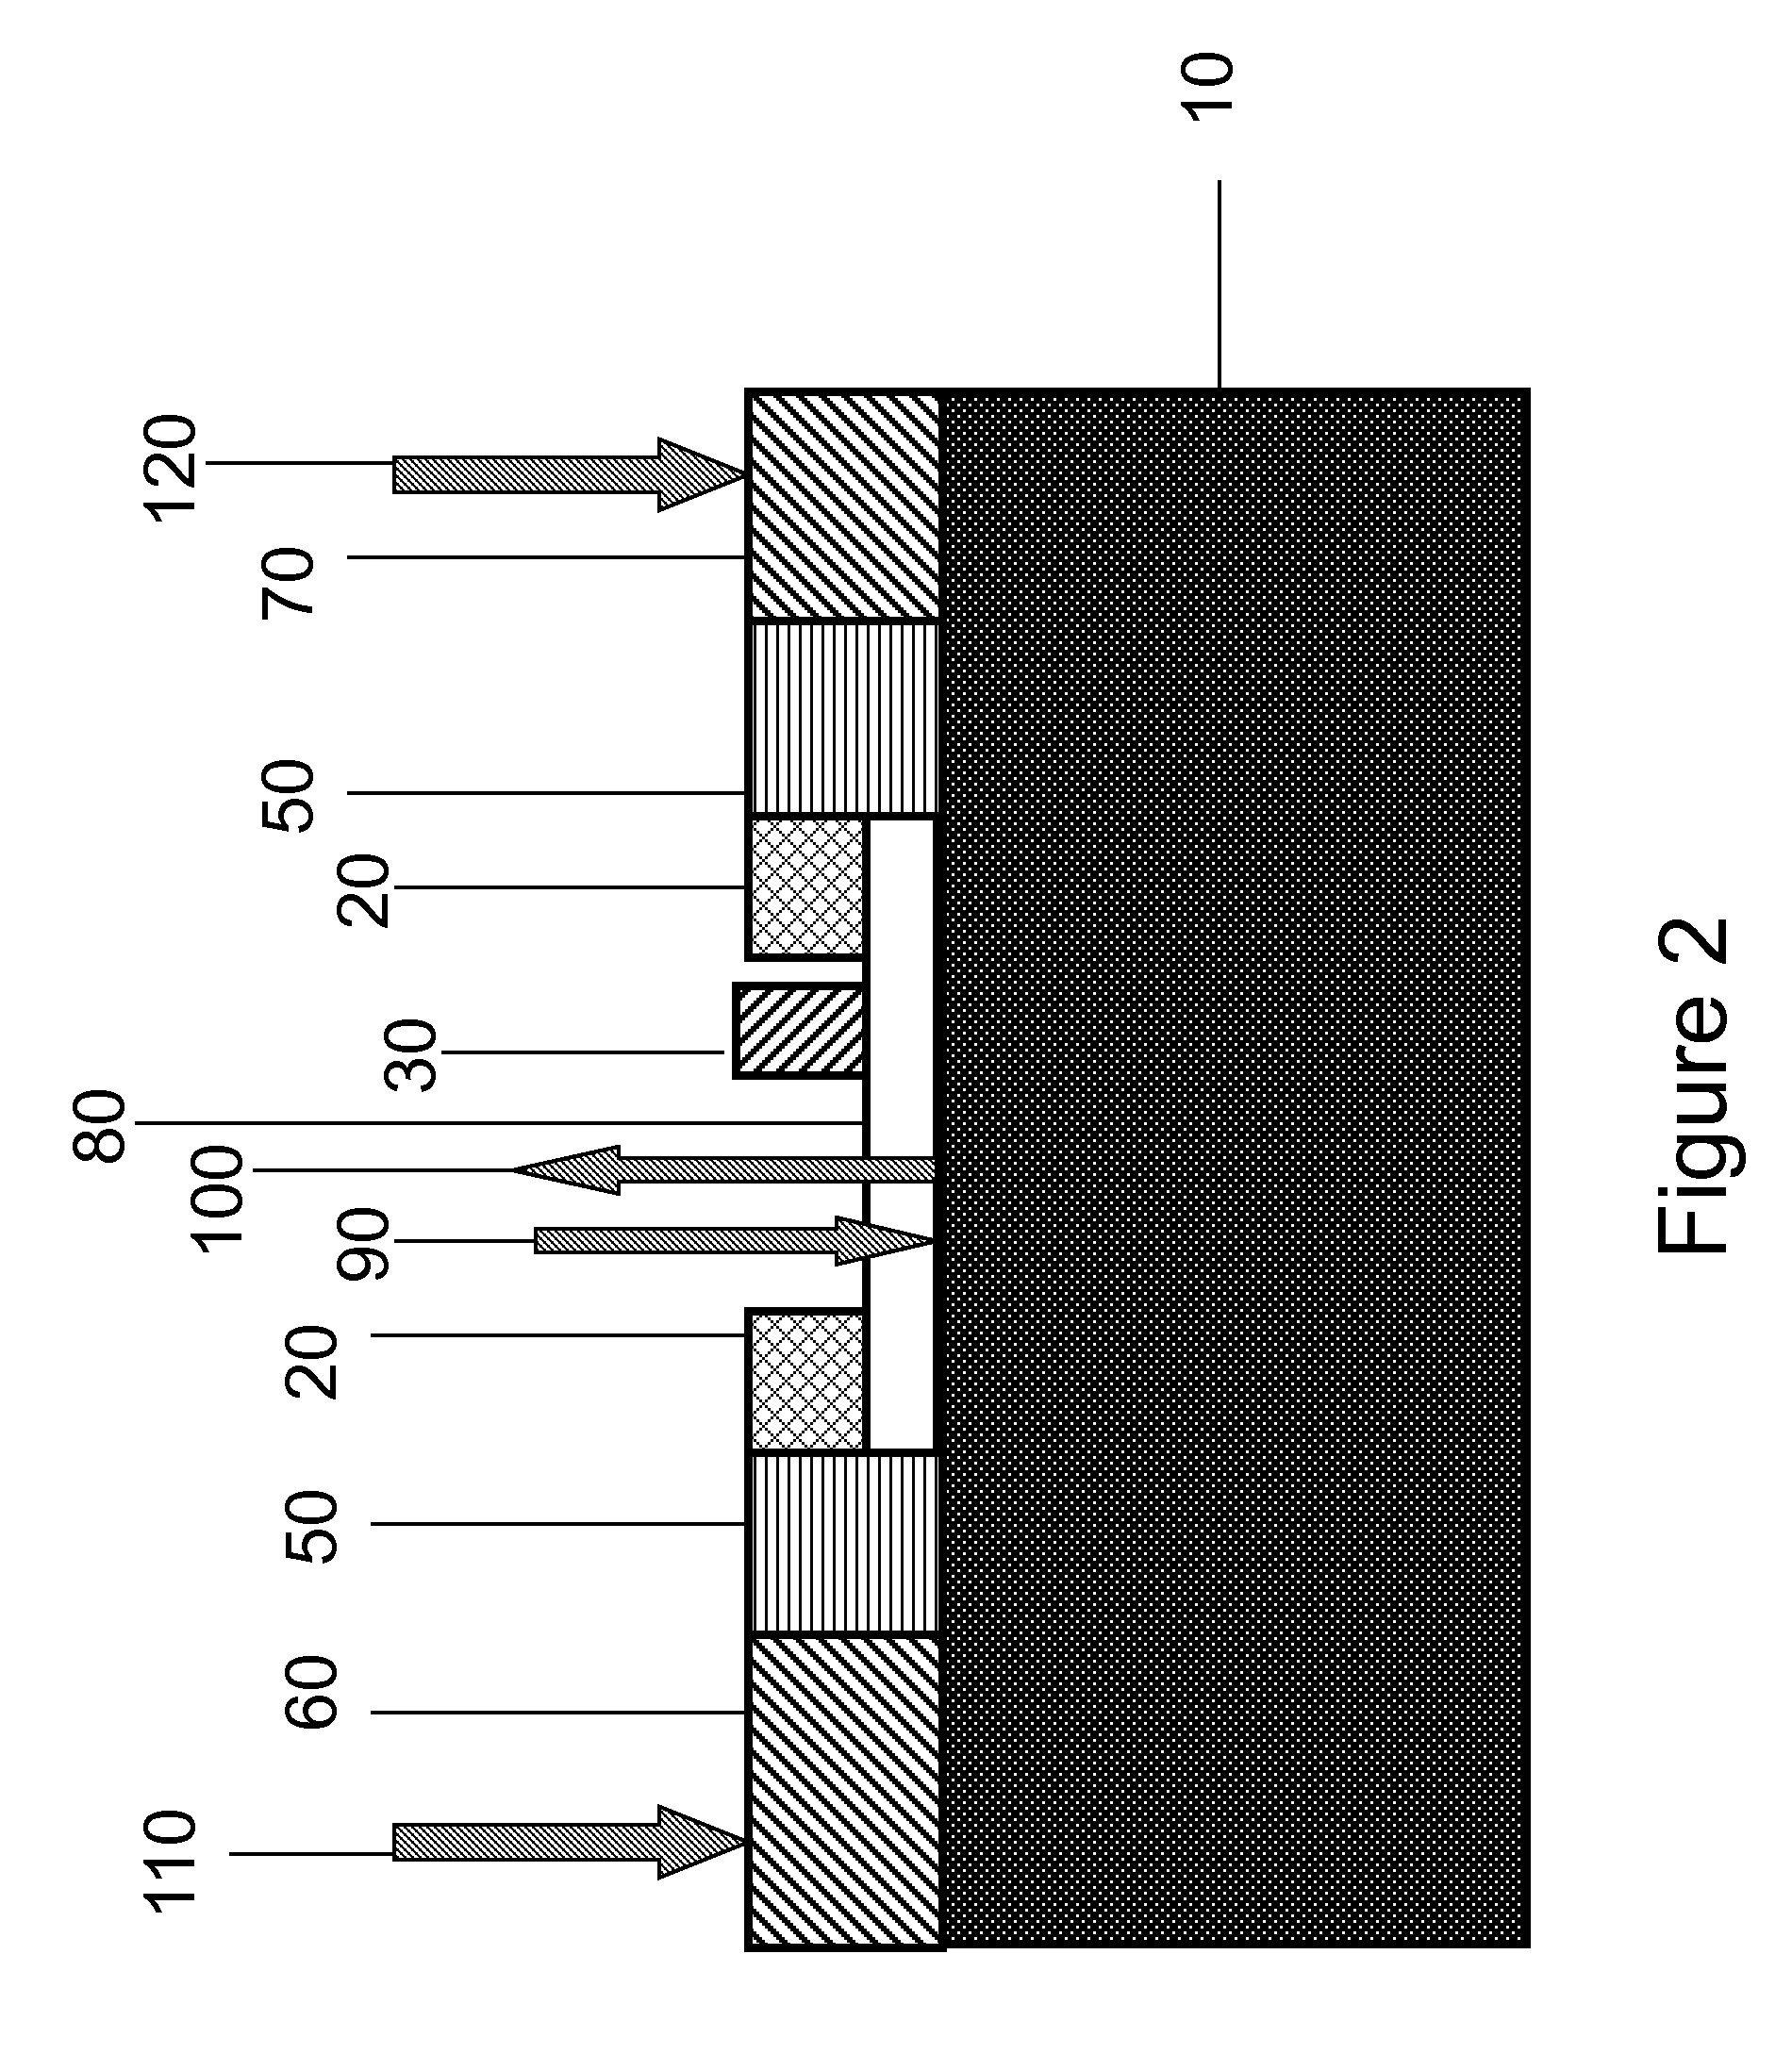 Apparatus for Increasing Blood Perfusion and Improving Heat Sinking to Skin